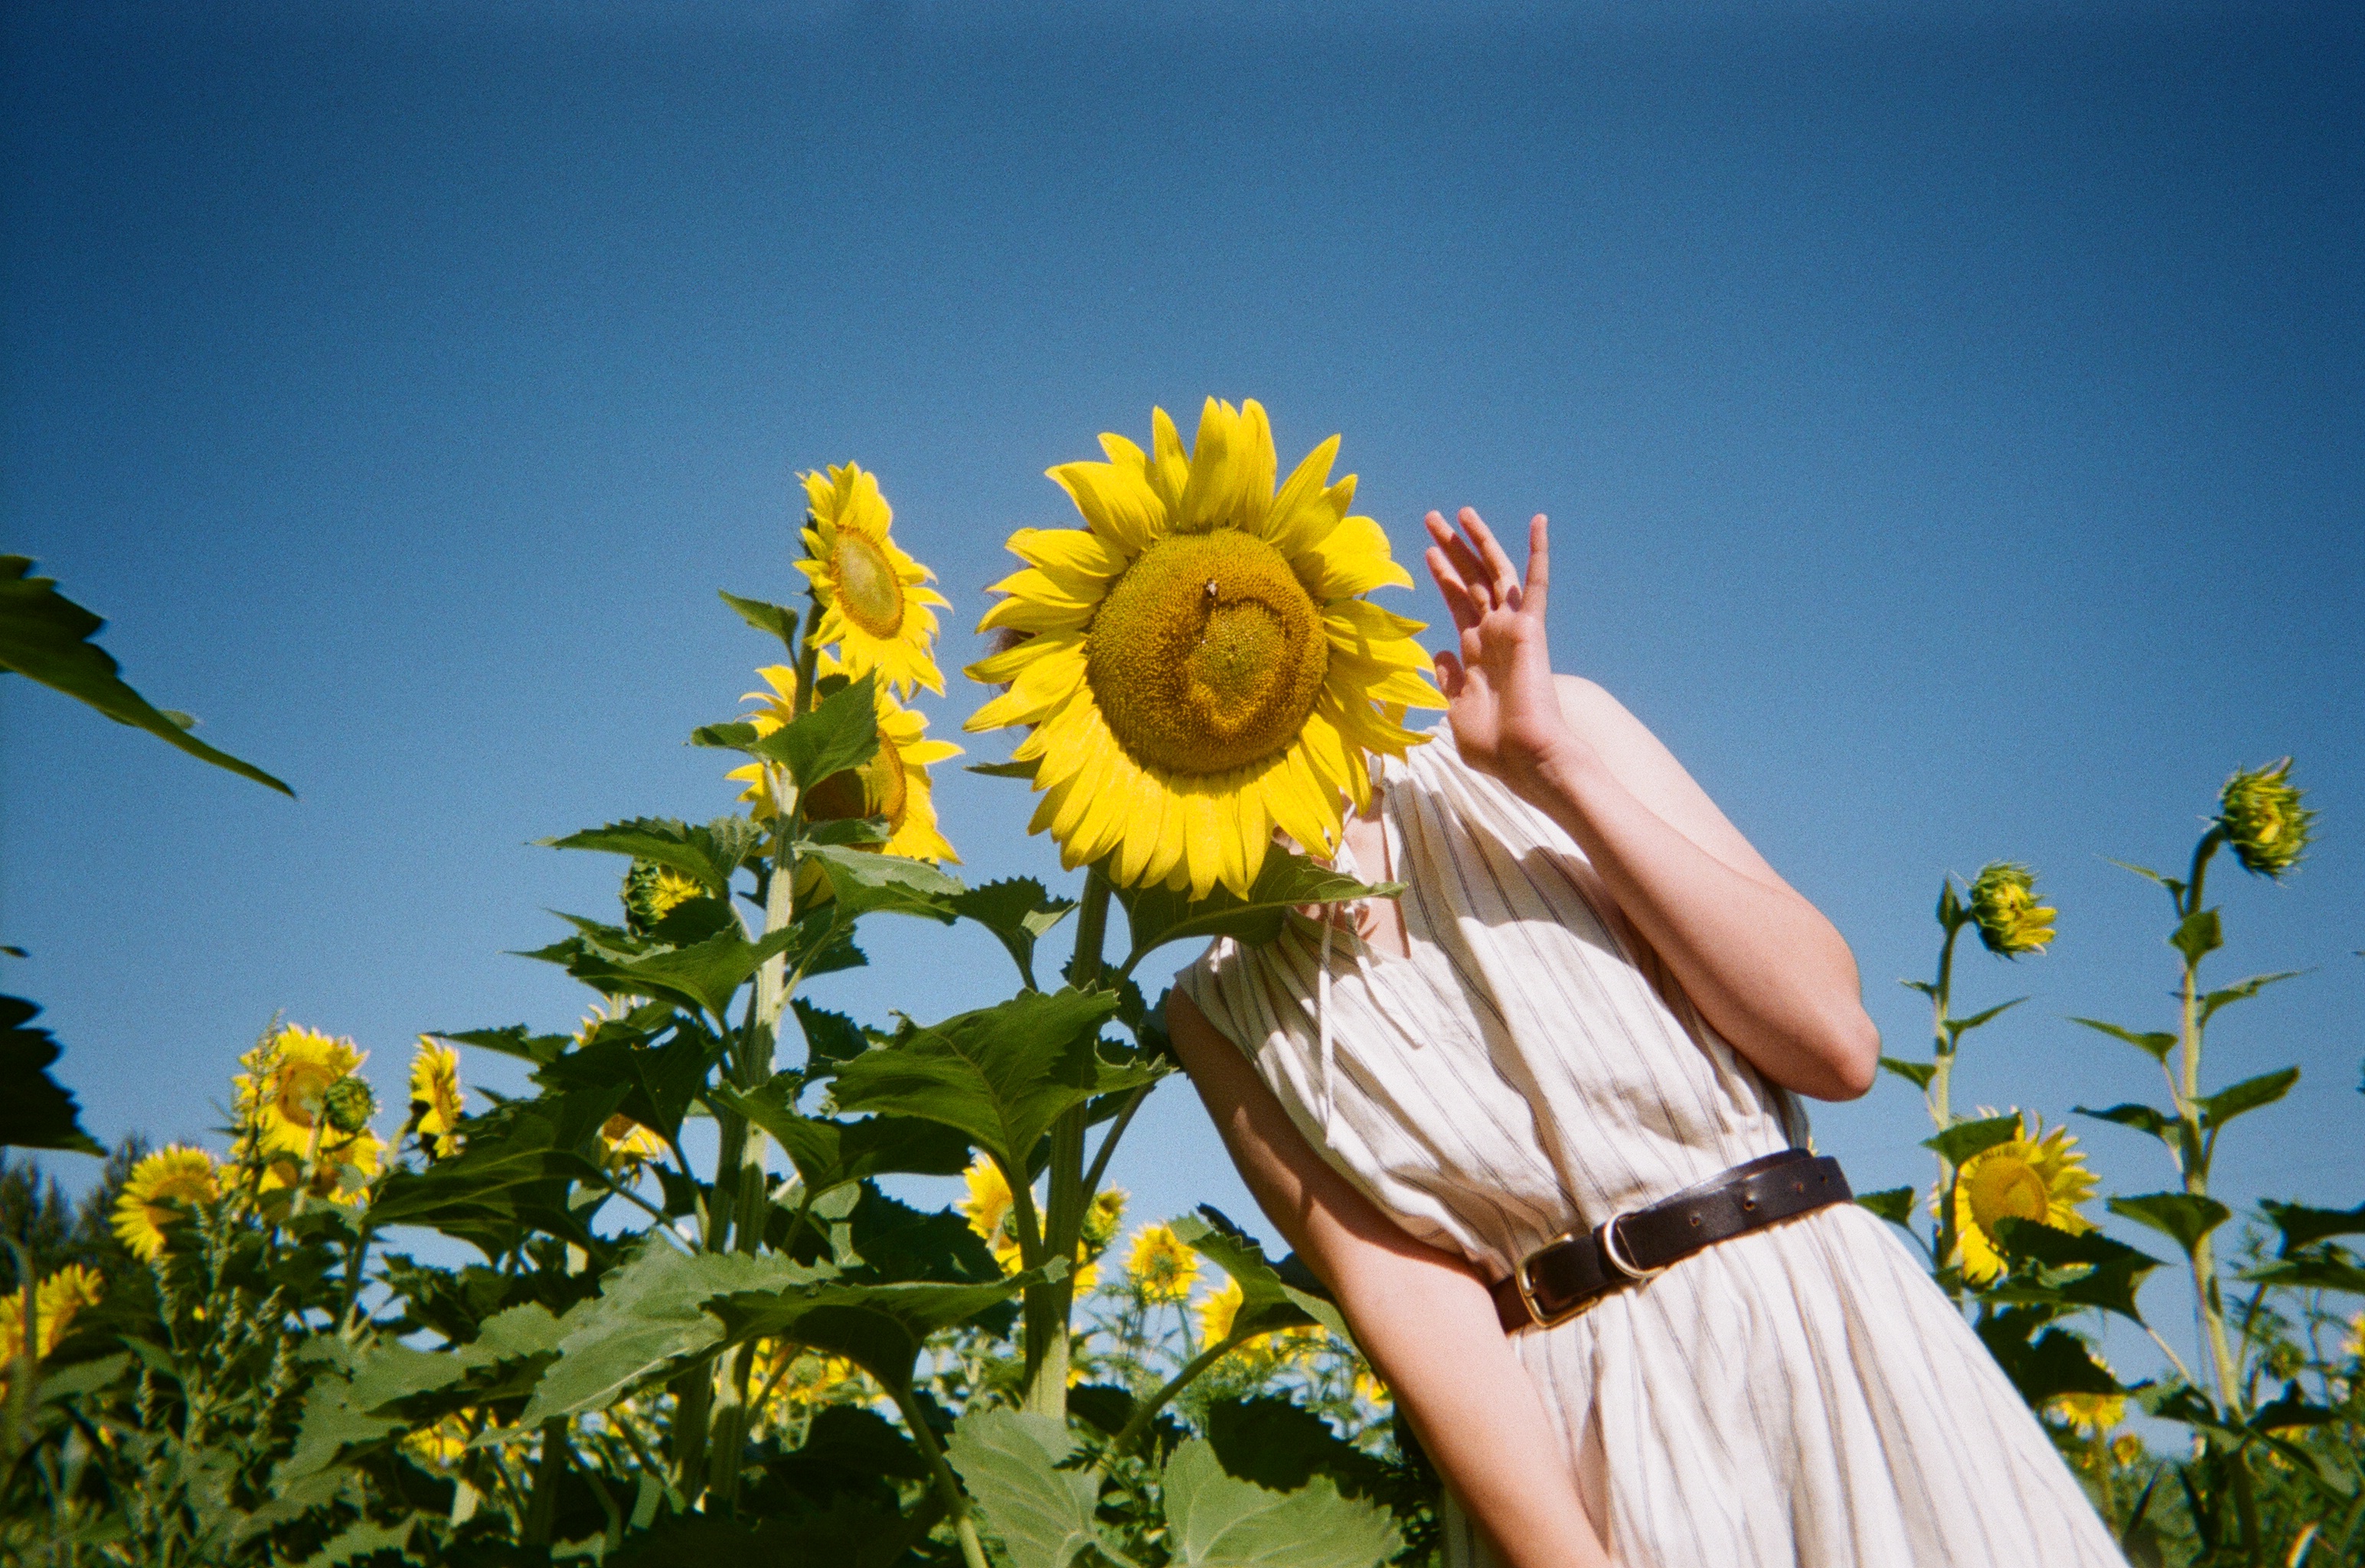 Person waving with face hidden behind sunflower